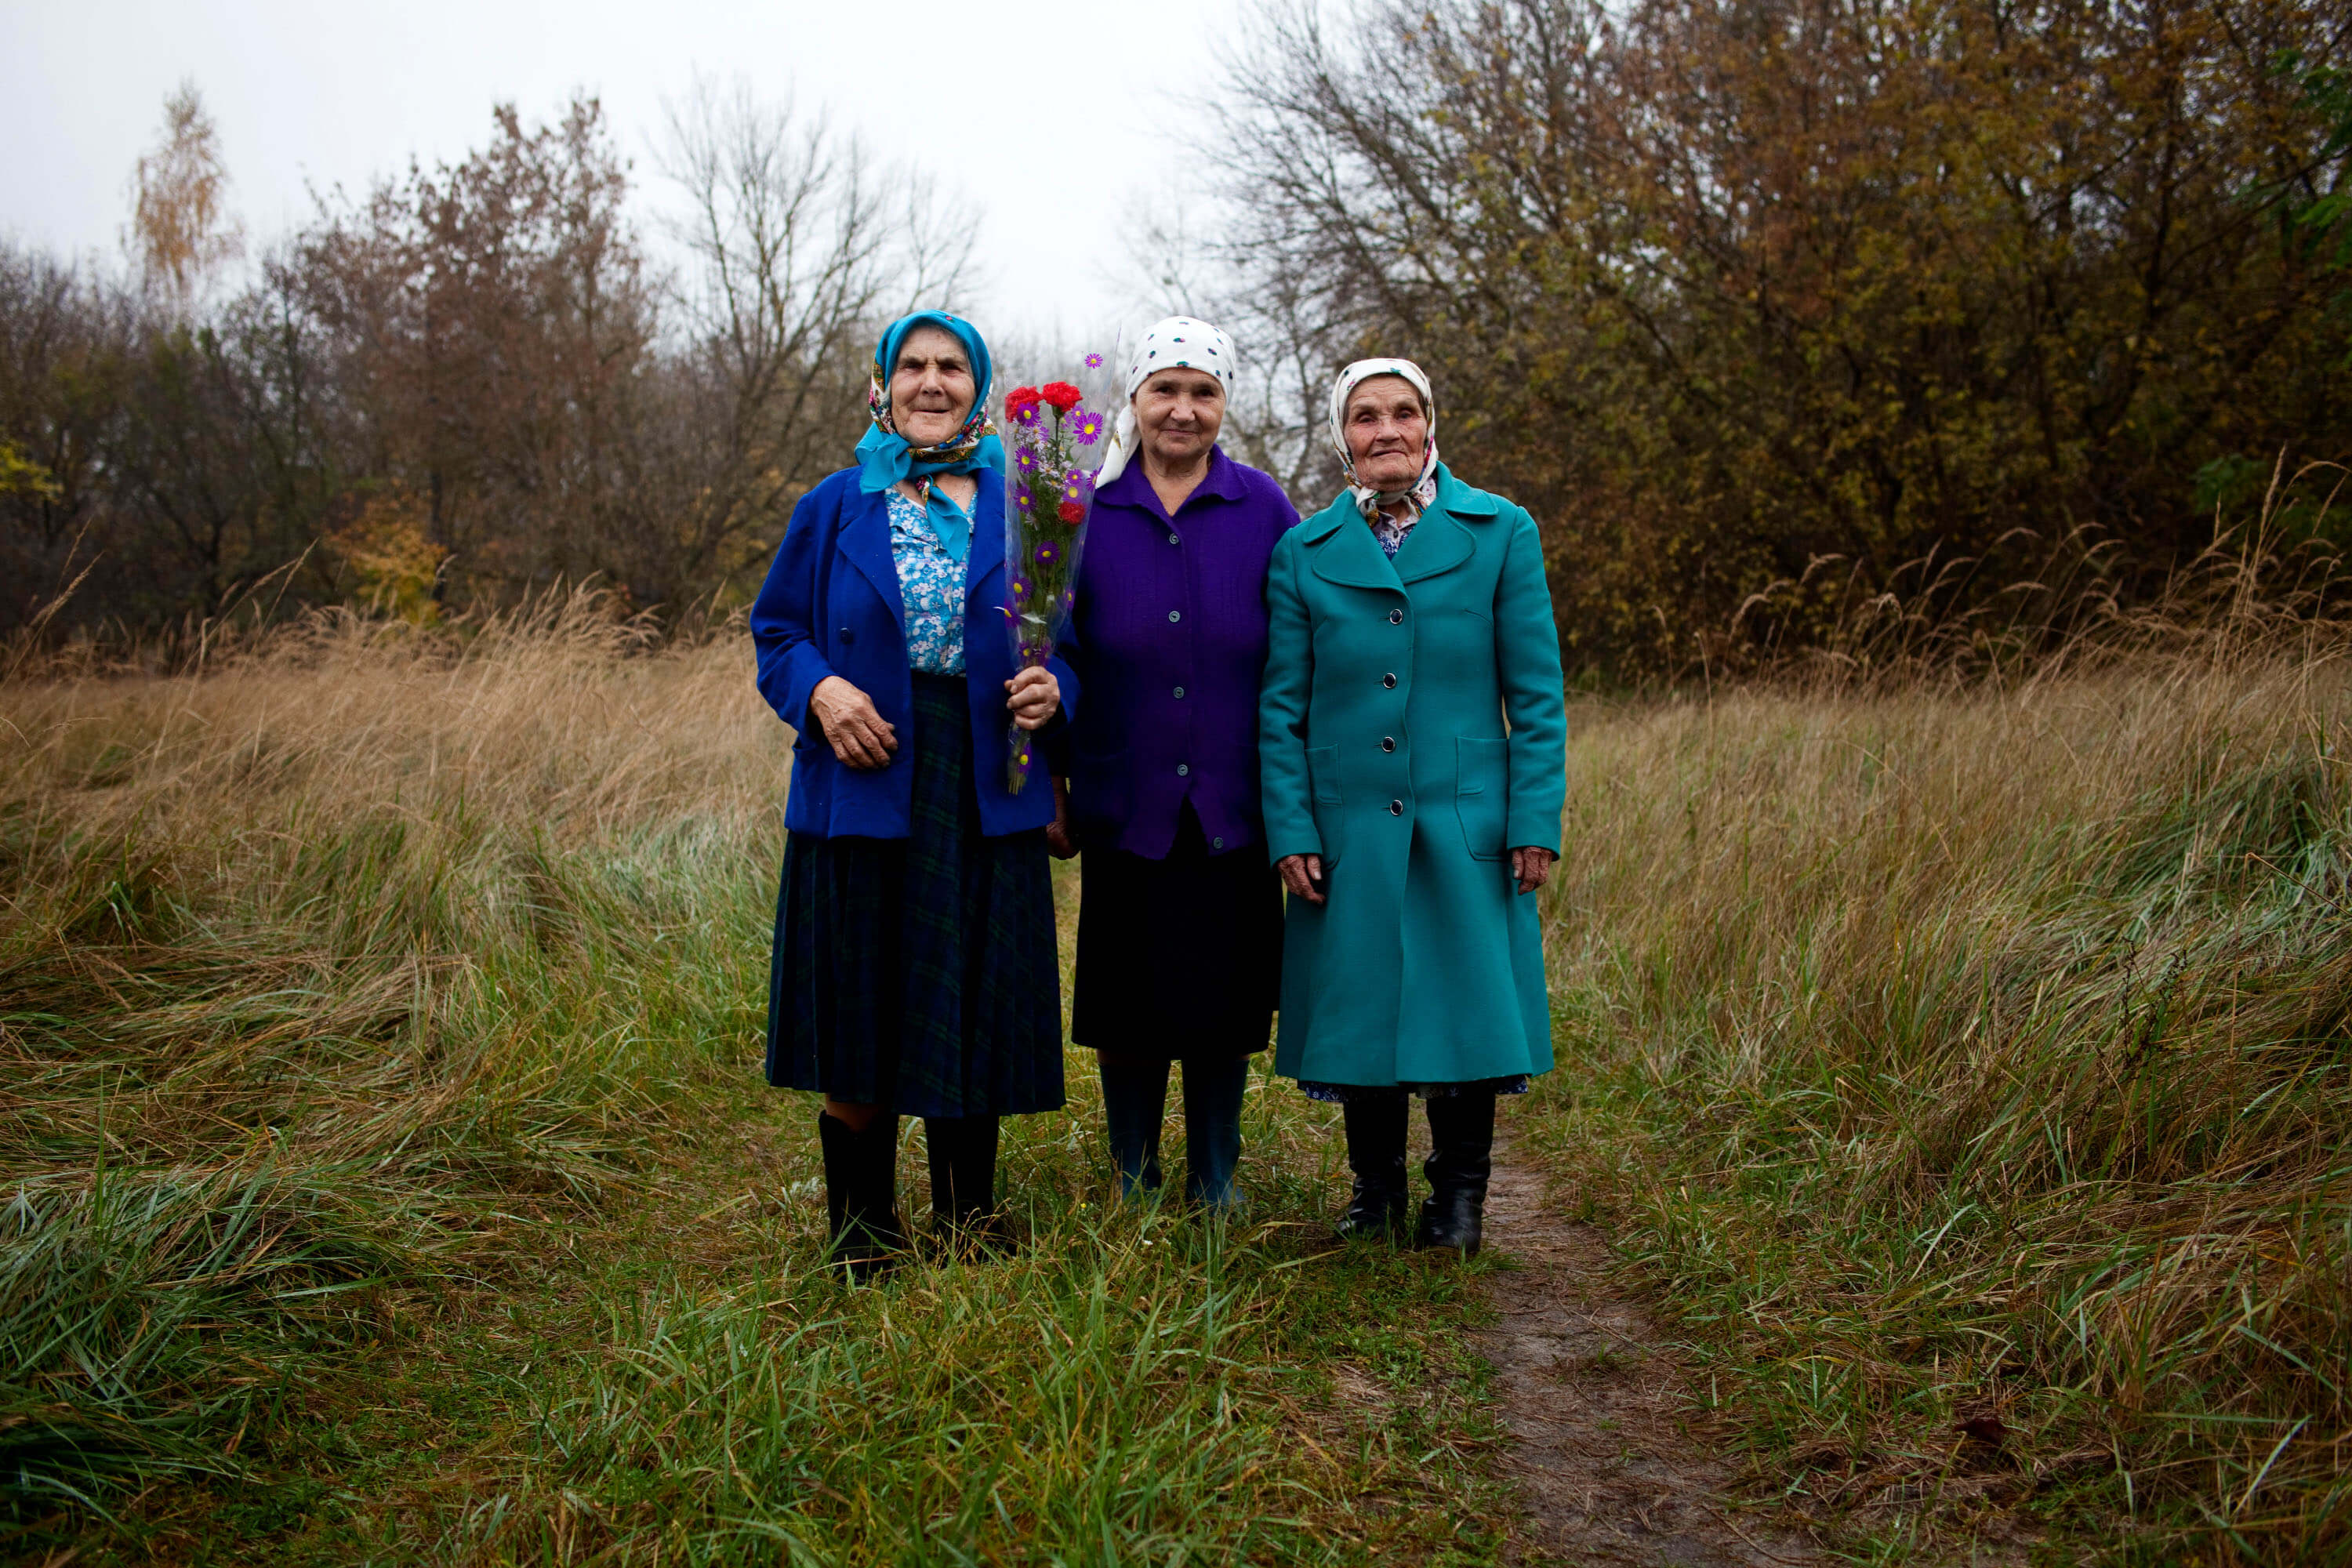 Three women stand next to each other in the middle of a path that cuts through a grassy field. They are all looking directly at the camera. Each of them wears mid-calf dresses and skirts with jackets and big boots, all in various hues of black, blue, purple, and white. Each of them wears a headscarf.